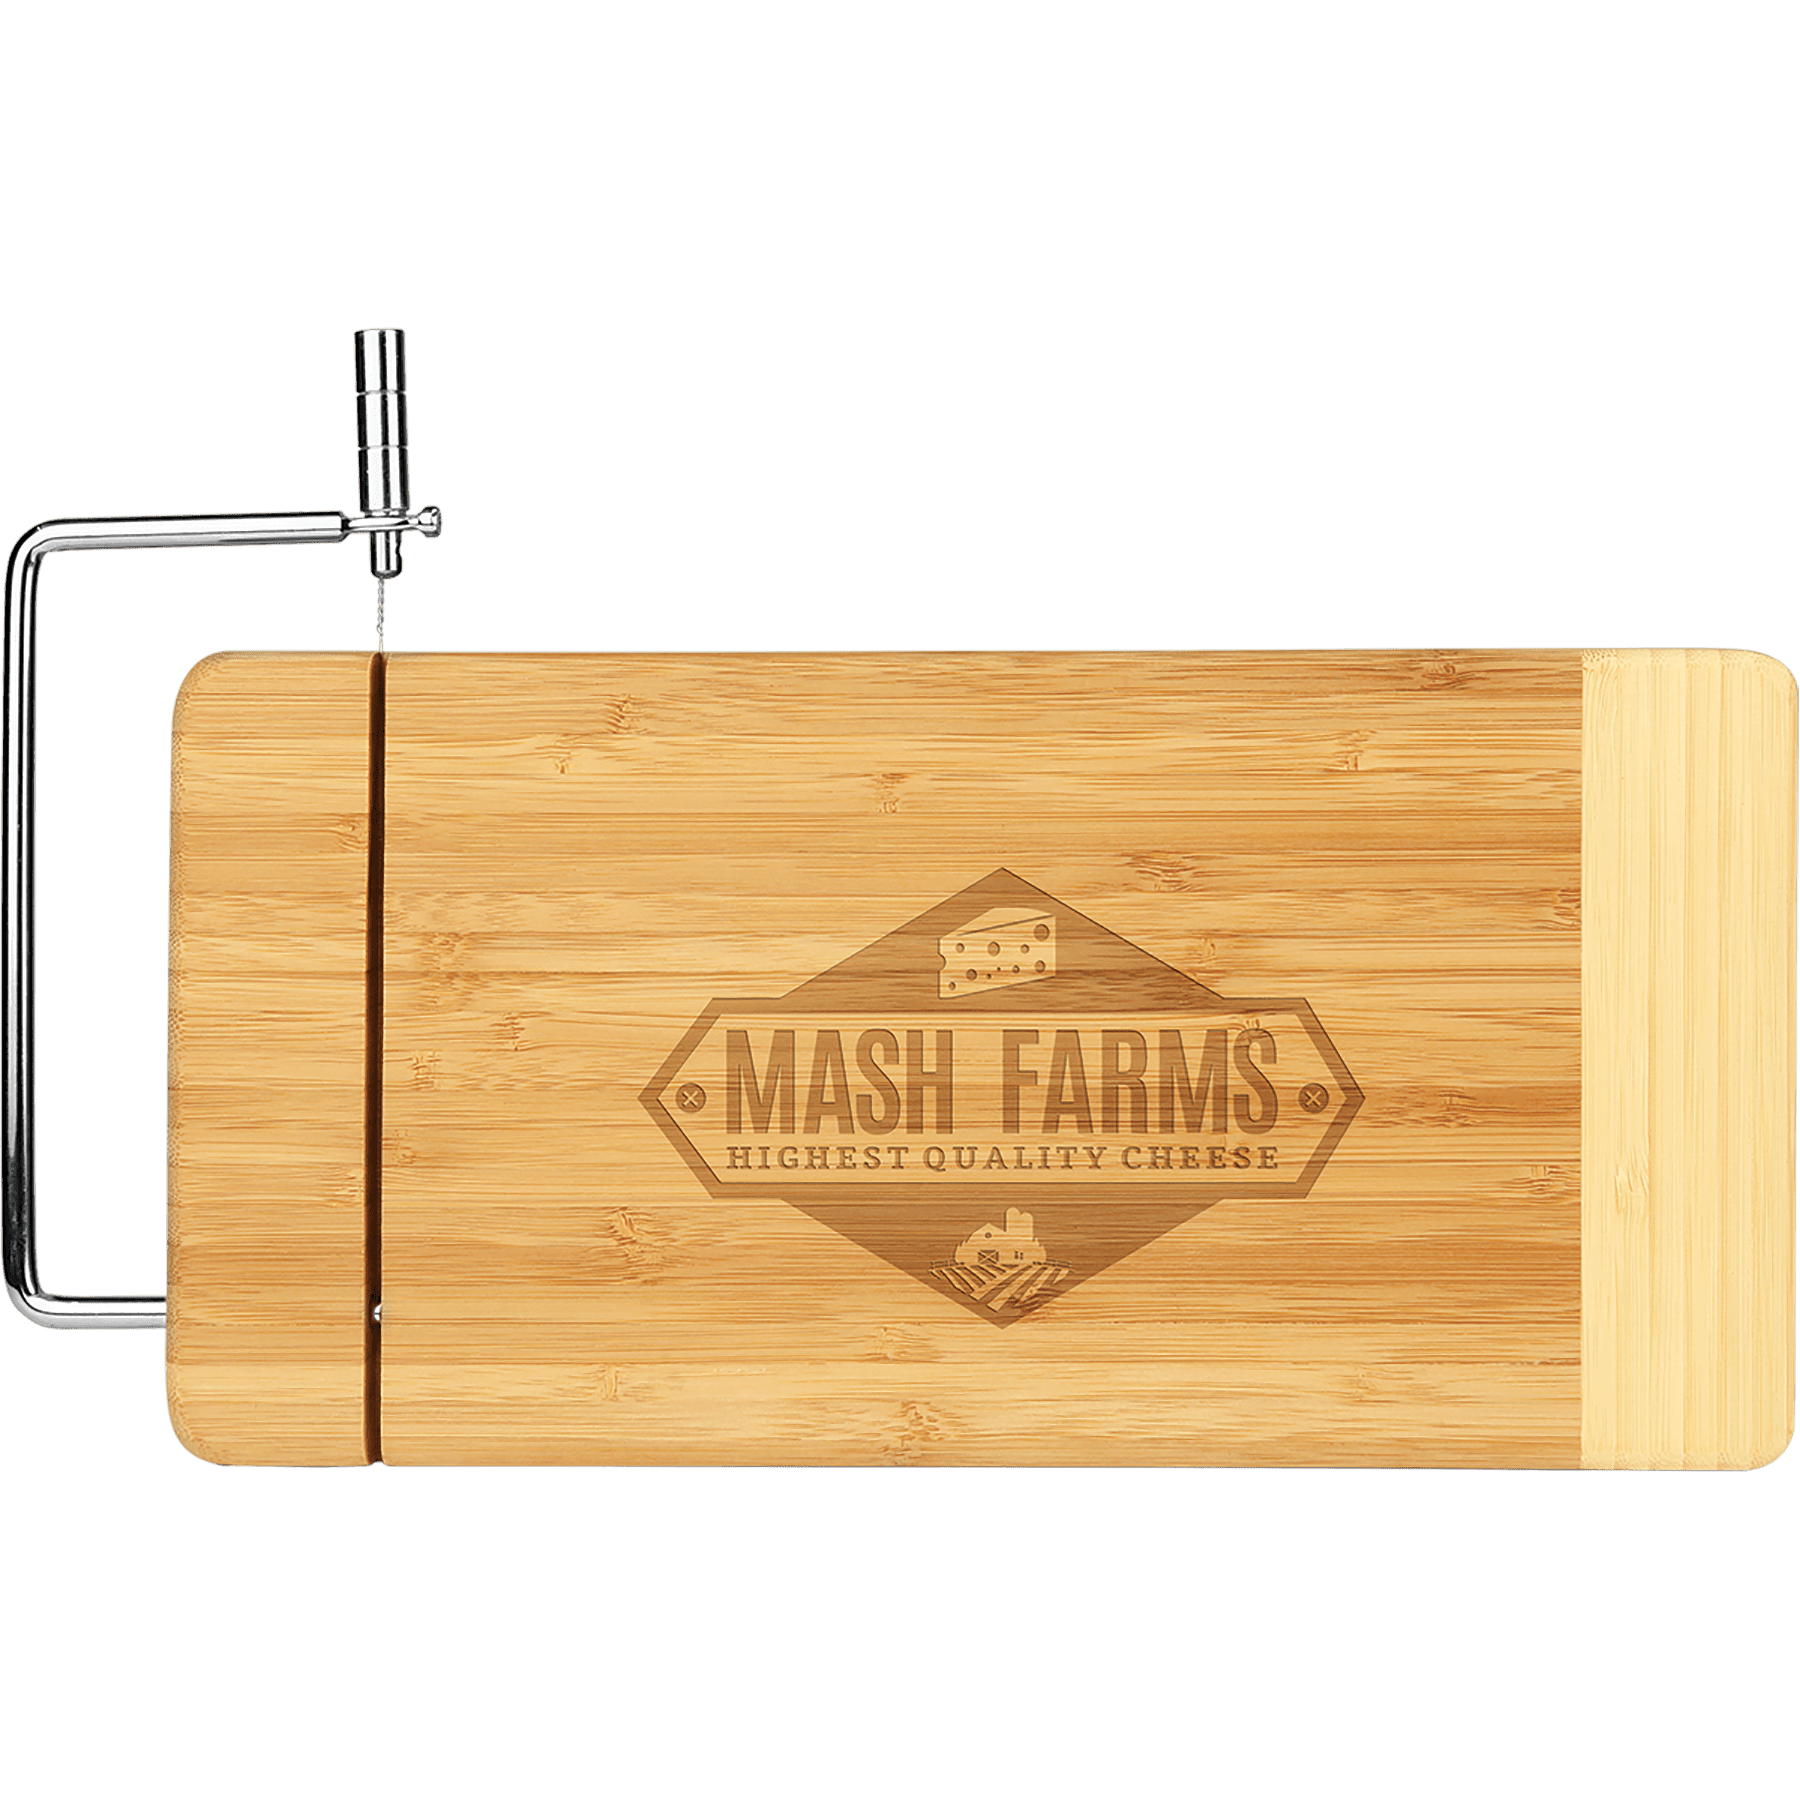 Bamboo cutting board with slicer